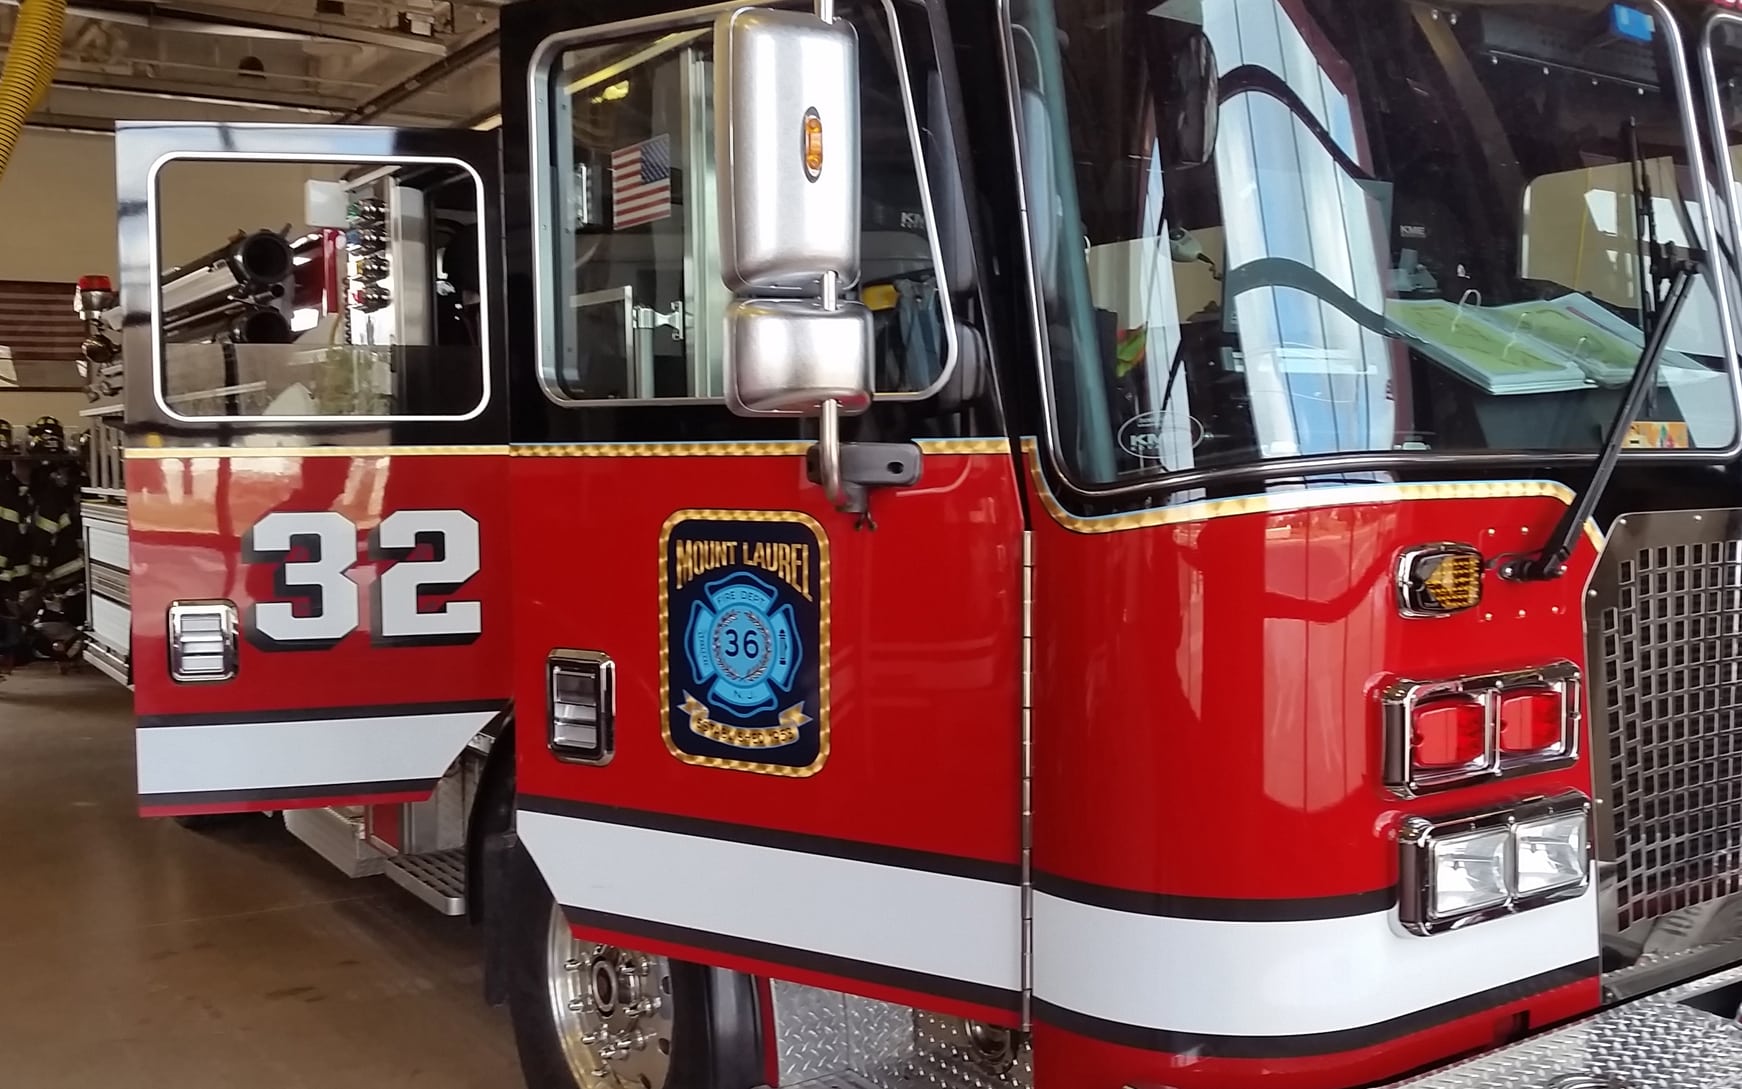  /></noscript></td>
</tr>
<tr>
<td><em><strong>Mount Laurel Fire Department serves a population of more than 40,000 citizens across 22-square miles in New Jersey. The department has been using TargetSolutions for nearly a decade.</strong></em></td>
</tr>
</tbody>
</table>
<p>Christopher Burnett and the personnel of Mount Laurel Fire Department were very pleased utilizing TargetSolutions as they always had. The software was viewed as an effective vehicle for delivering EMS continuing education, compliance training, and document review.</p>
<p>But after watching a <strong><a target=